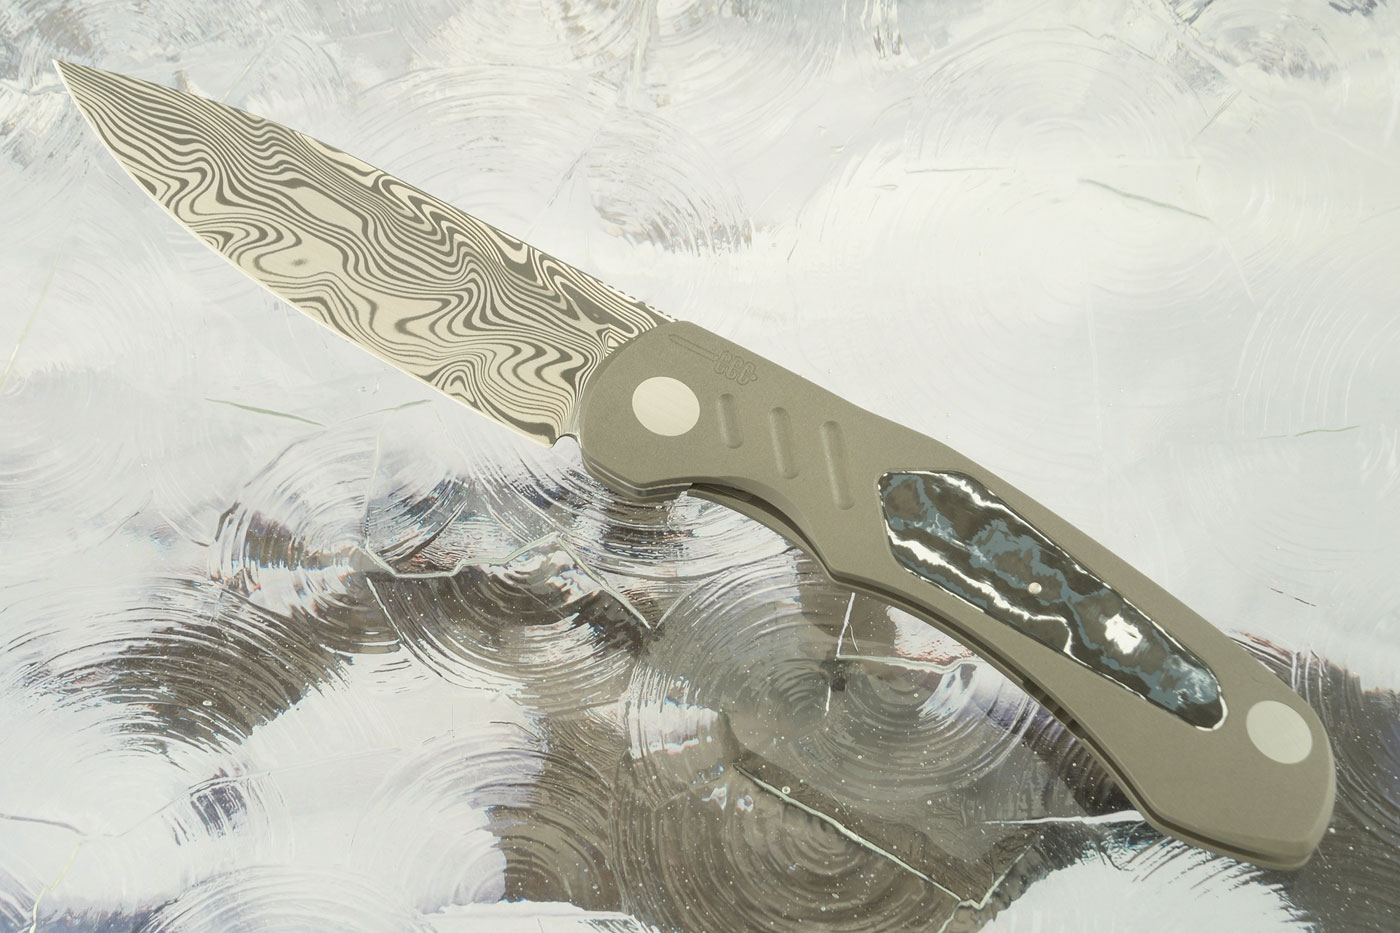 Viper DP Front Flipper with Damasteel and White Storm FatCarbon